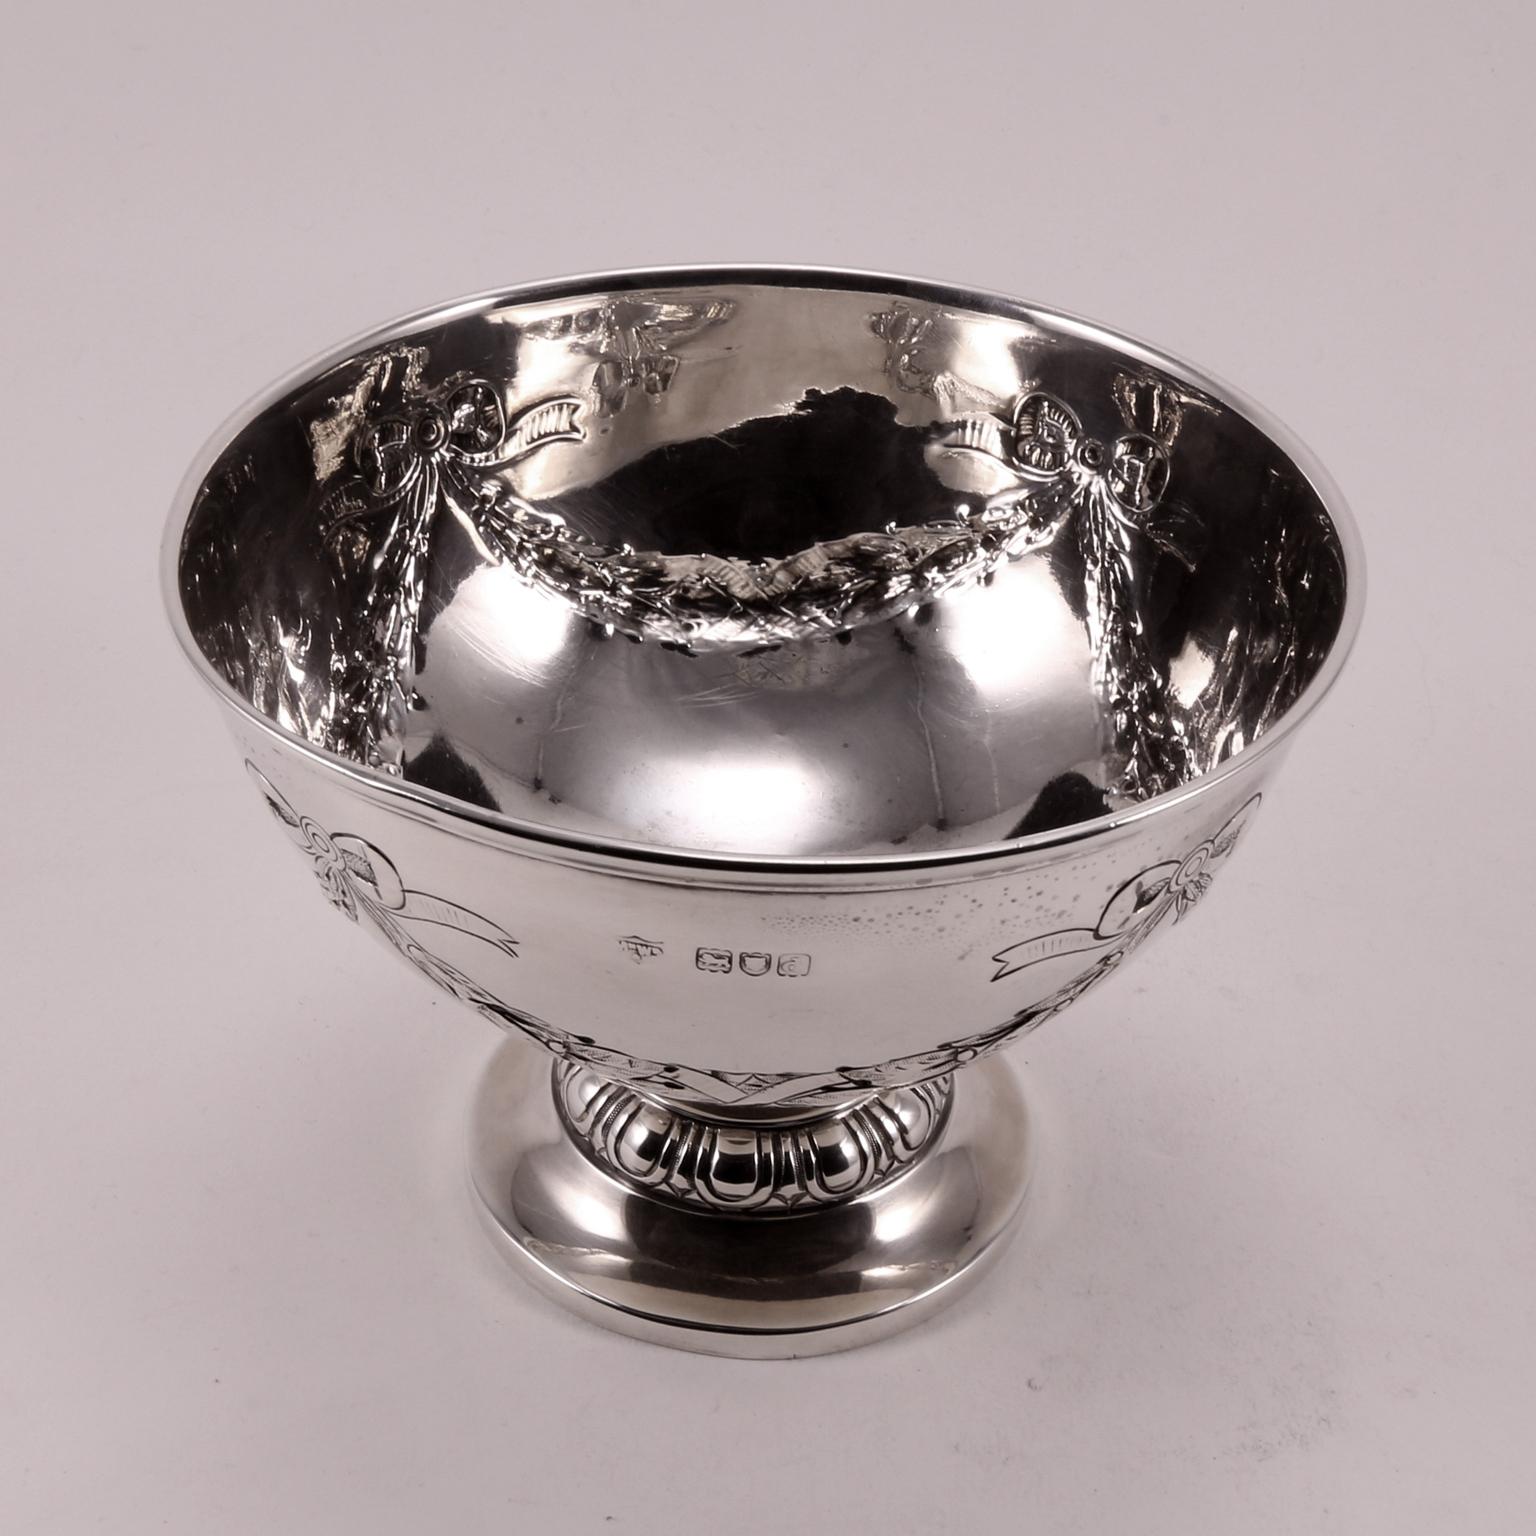 19th Century Mappin Webb Silver Bowl Decorated with Flackes and Flowers im Zustand „Gut“ im Angebot in Florence, IT